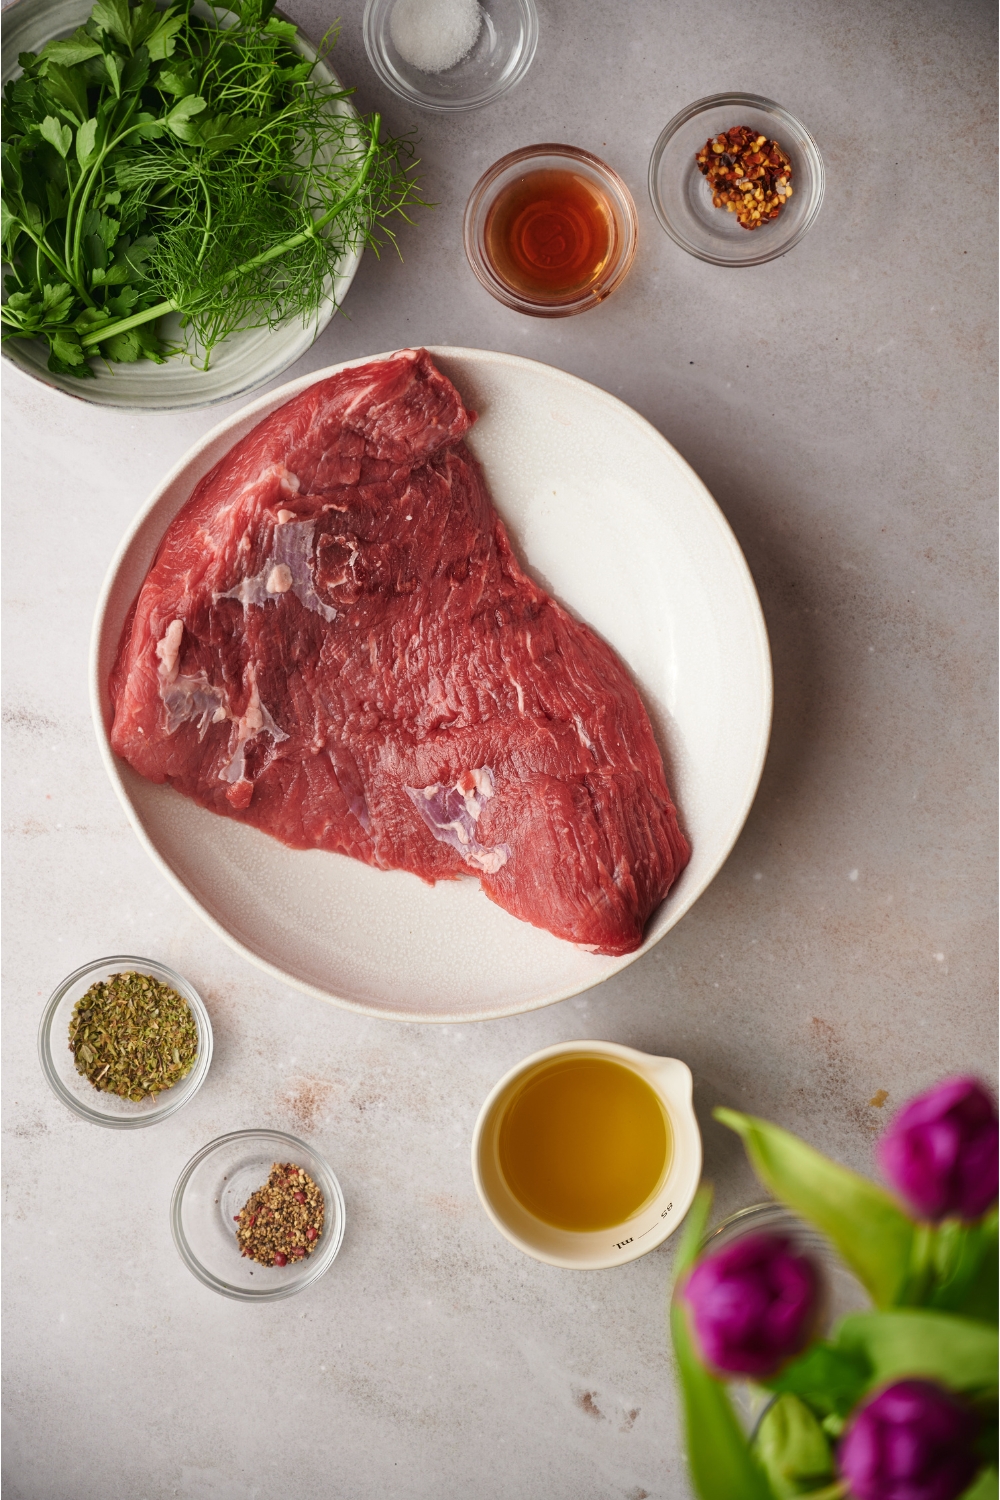 A raw tri-tip steak surrounded by ingredients including bowls of fresh herbs, red wine vinegar, red pepper flakes, black pepper, and oil.